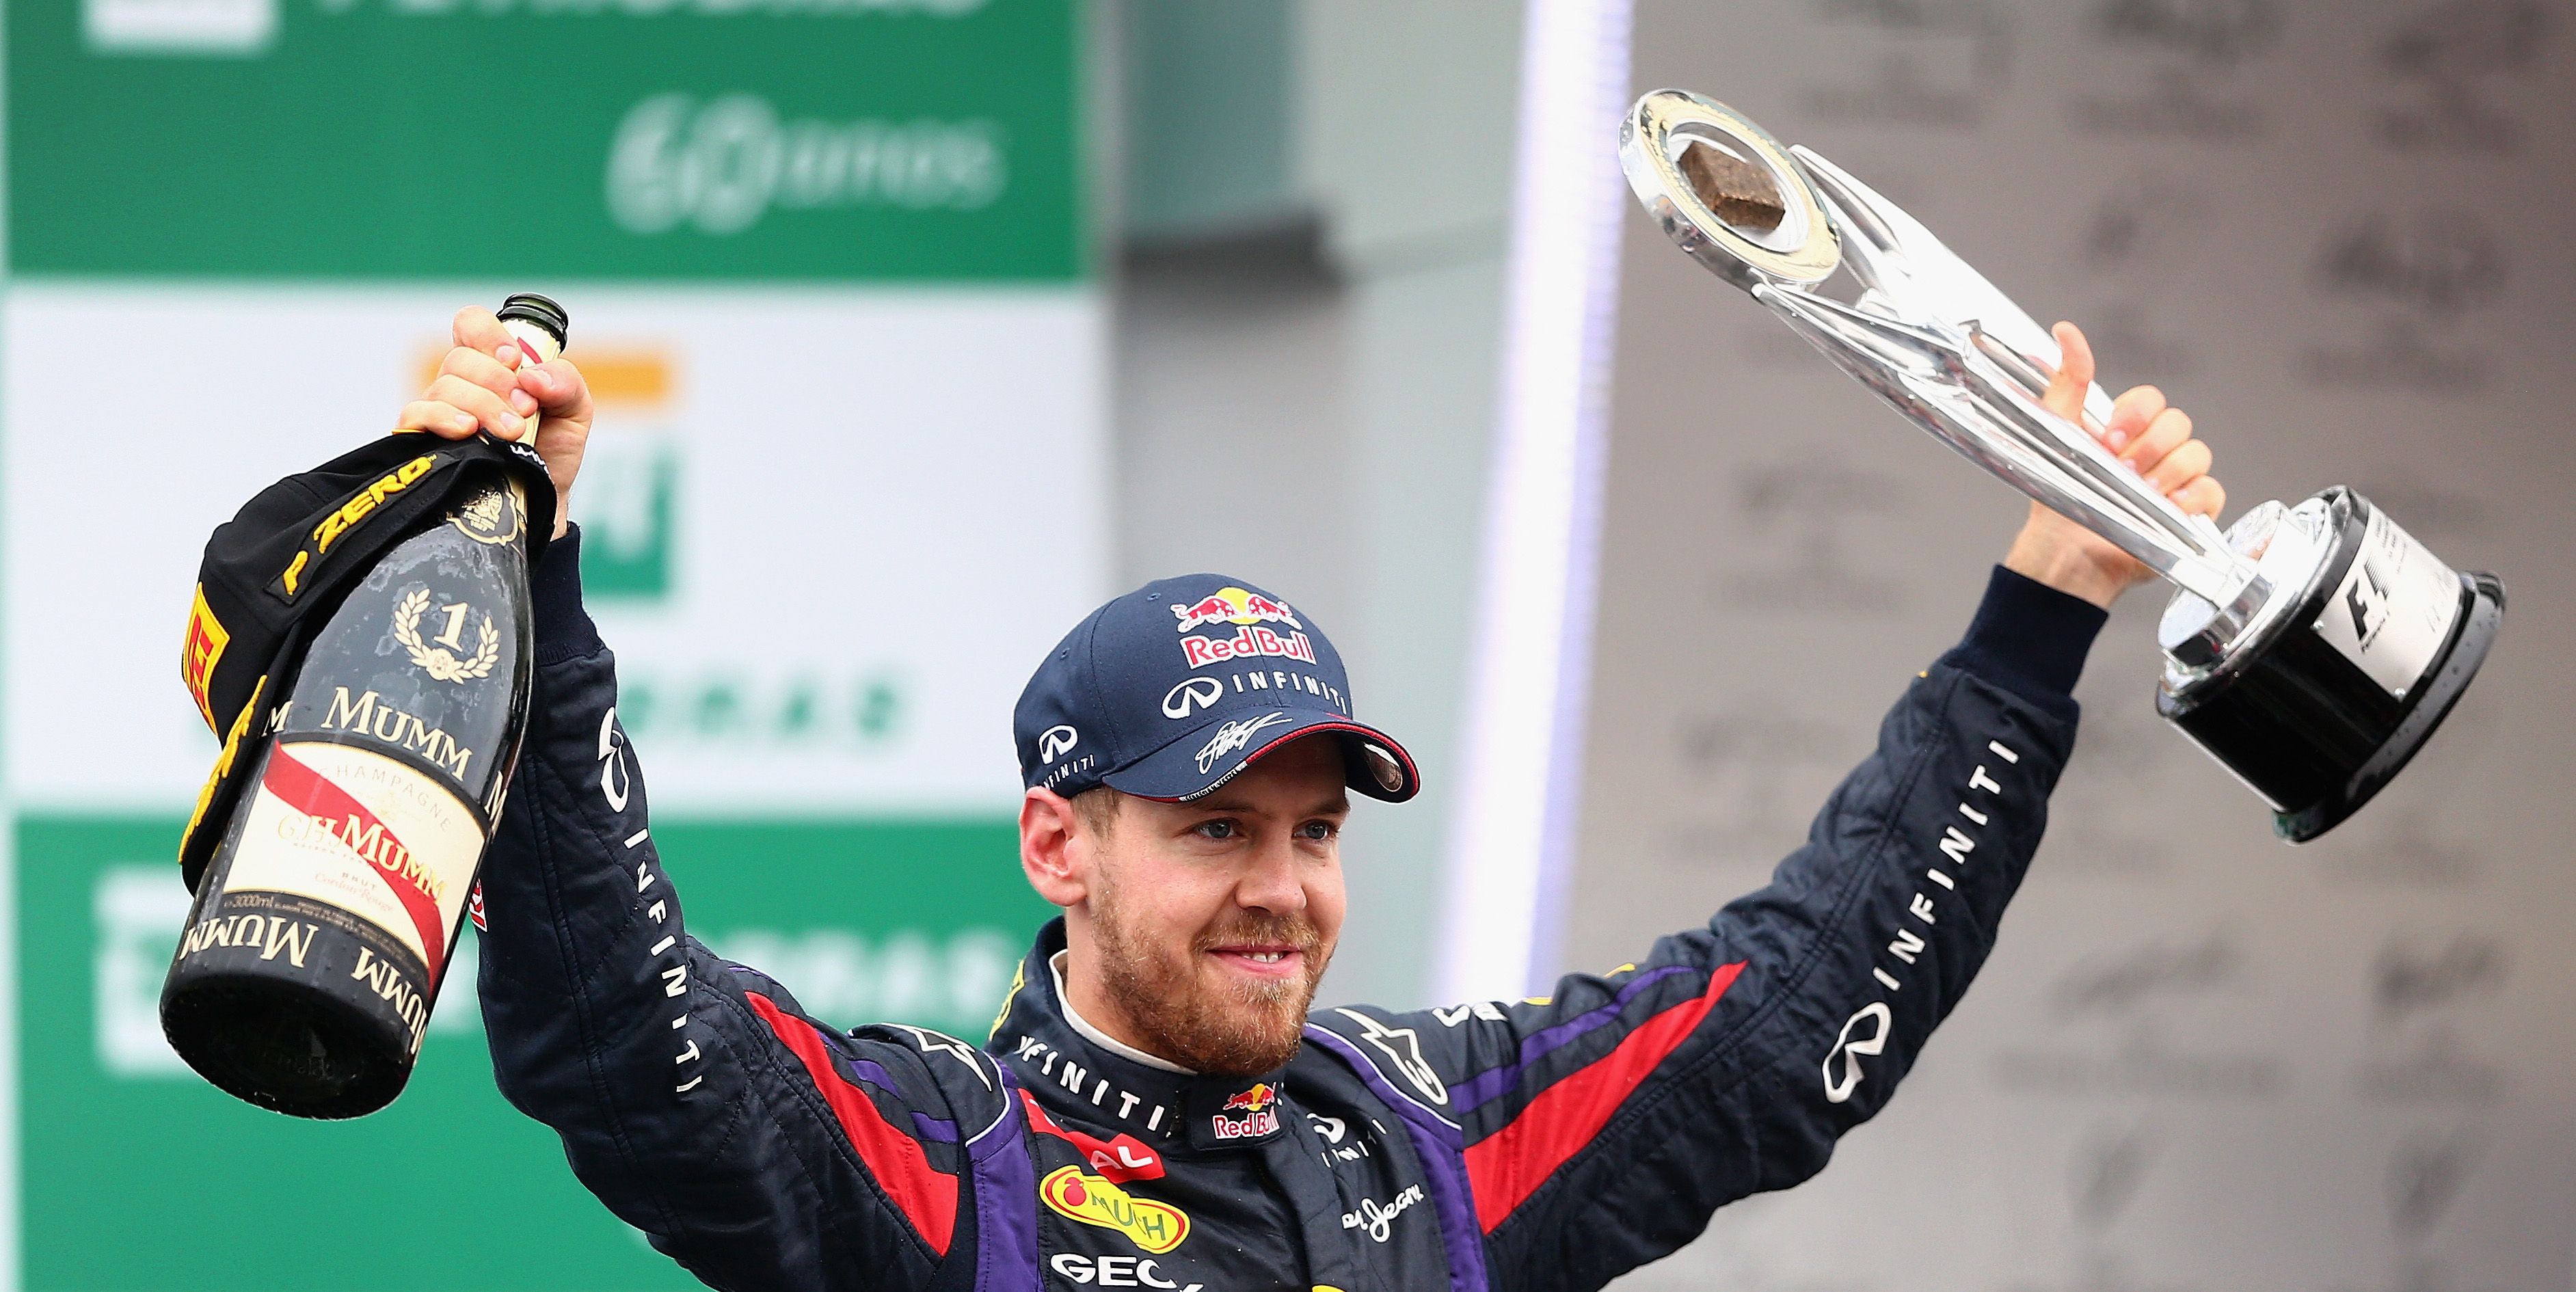 Sebastian Vettel Might Be Headed to a Leadership Role at Red Bull